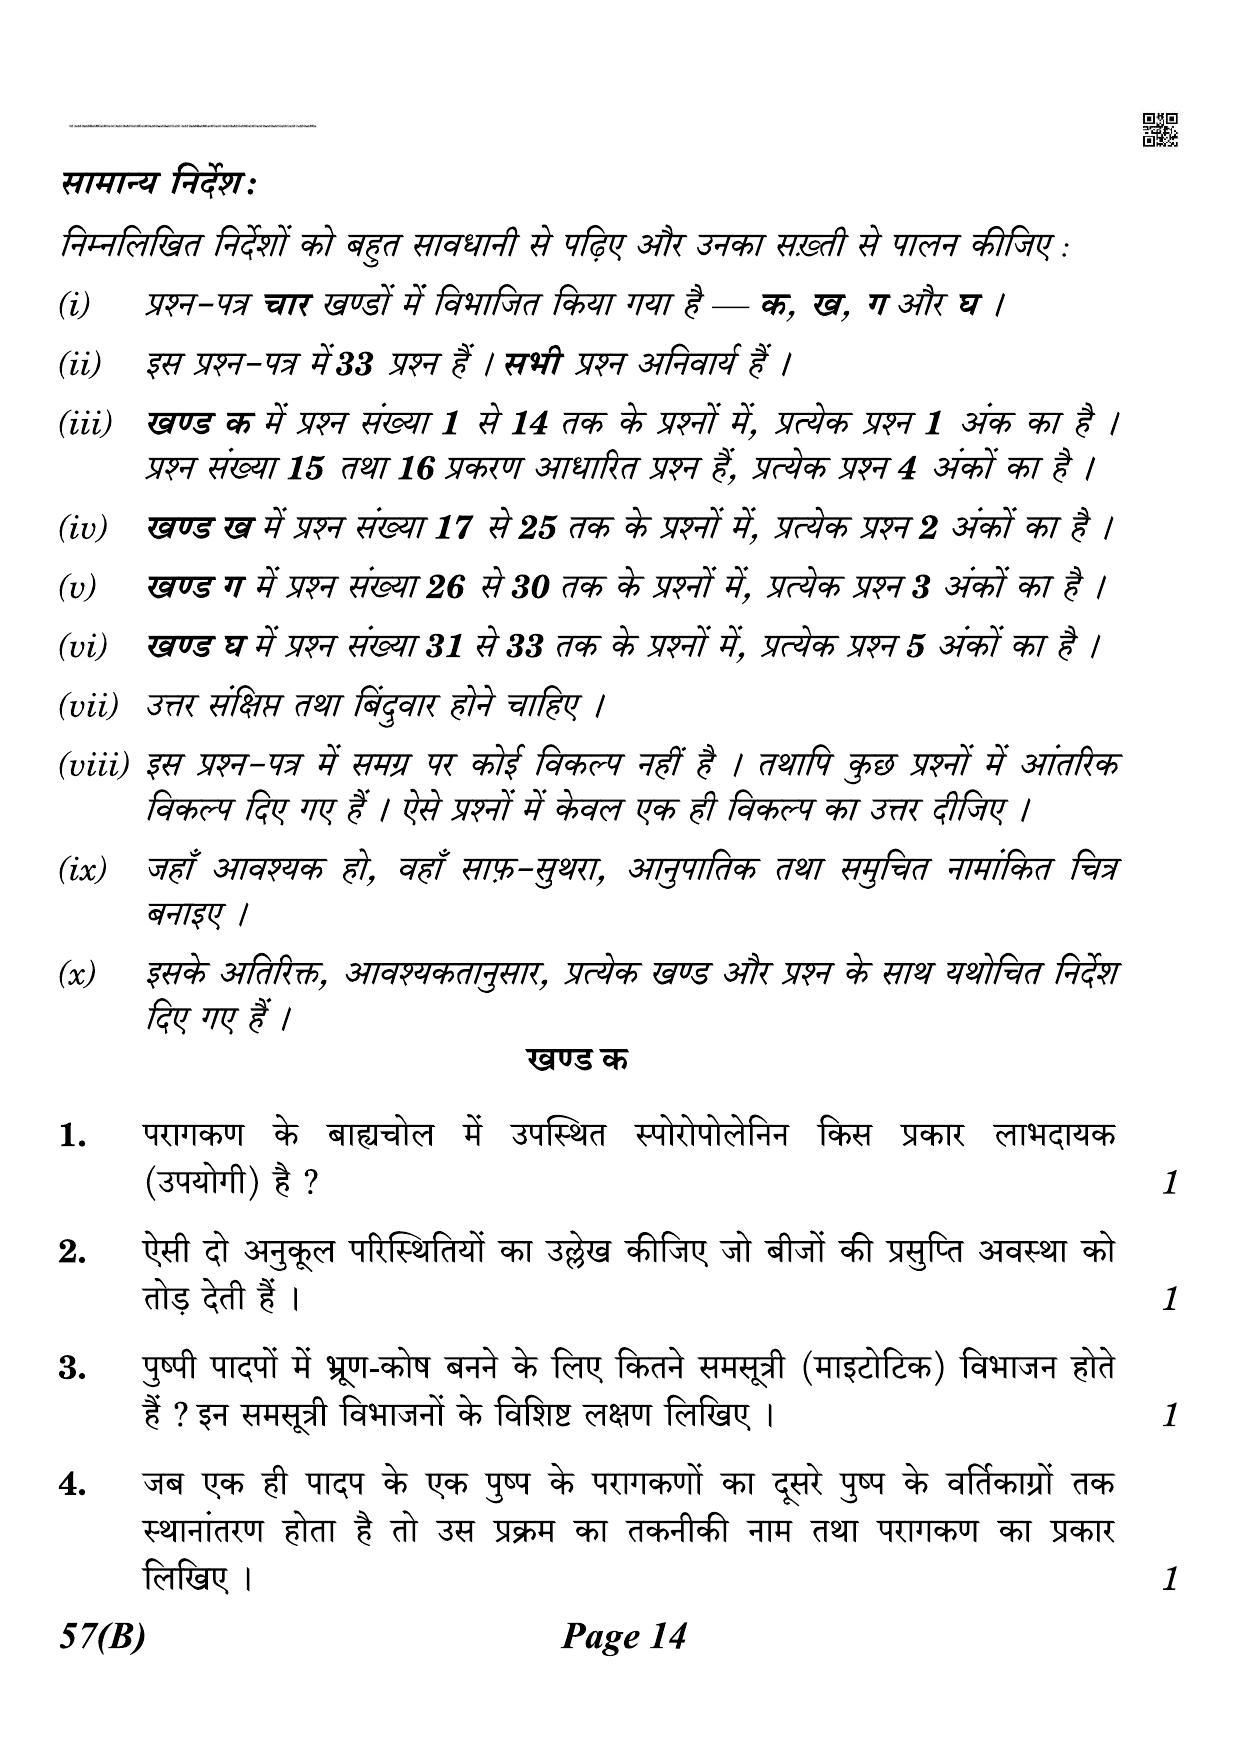 CBSE Class 12 QP_044_biology_for_visually_impared_candidates 2021 Compartment Question Paper - Page 14